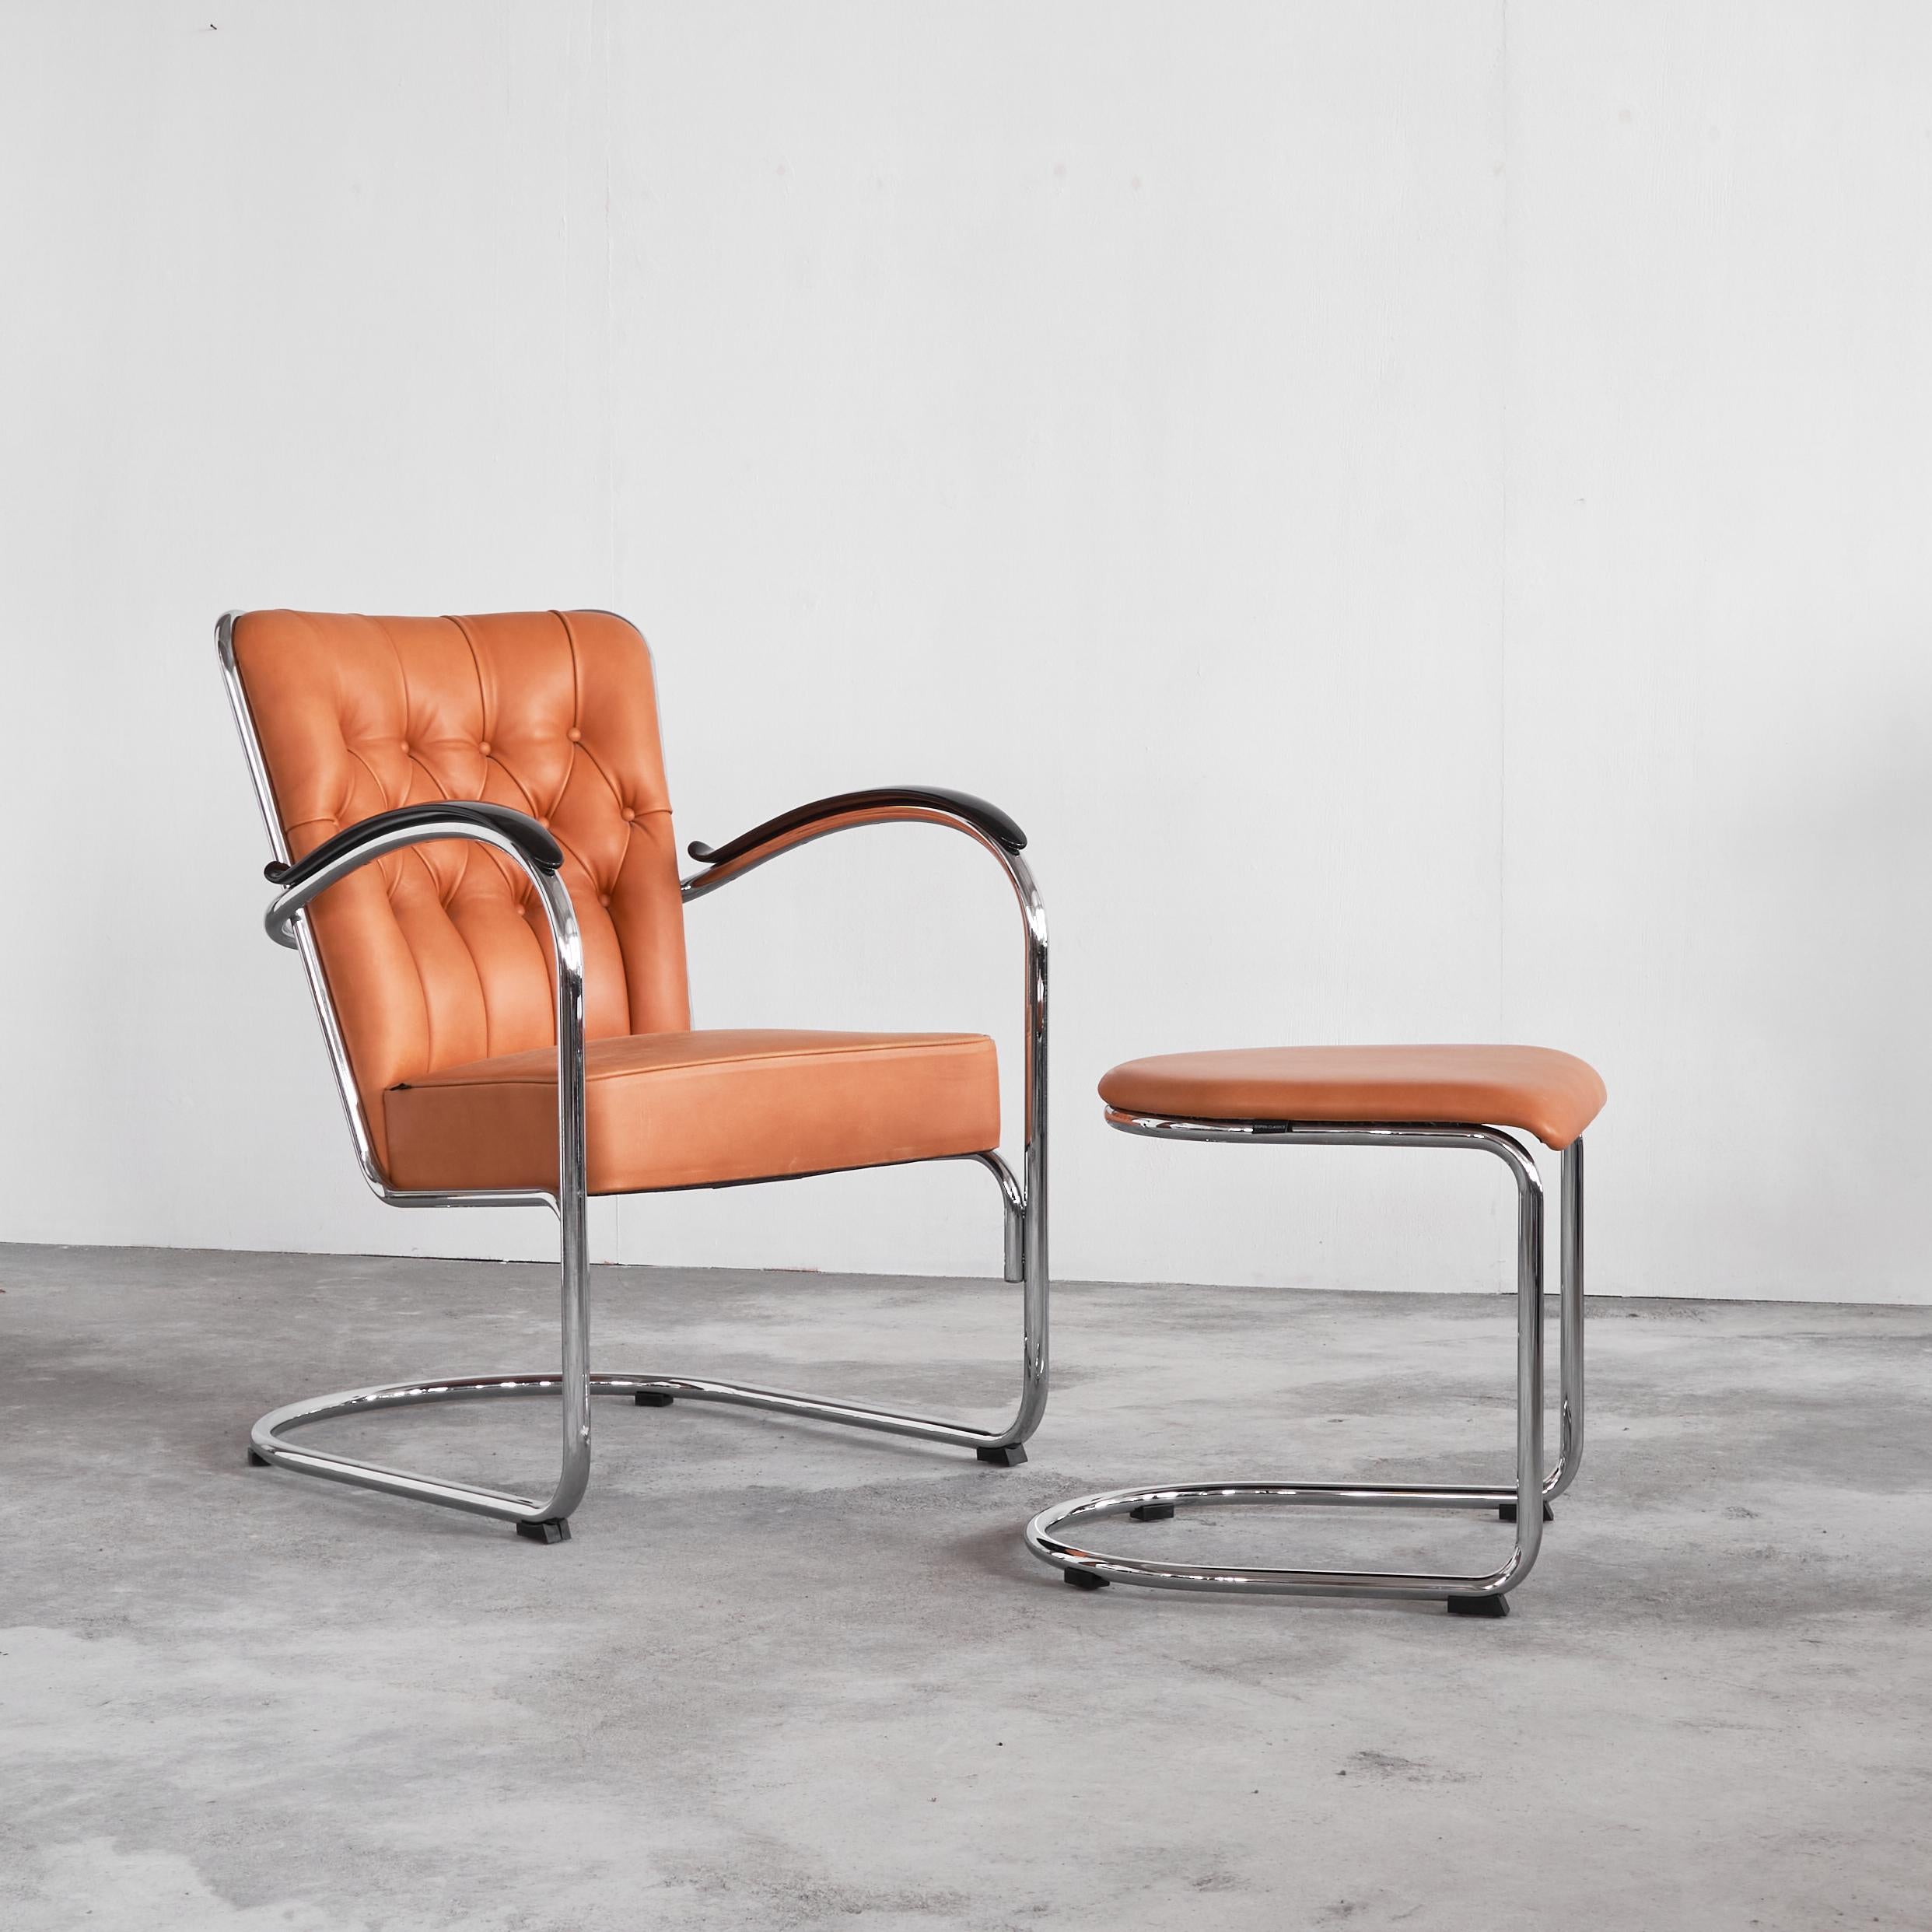 W. H. Gispen 412SGE in Chrome and Padded Leather with Ottoman, 21 century edition for Dutch Originals, The Netherlands.

Stunning Dutch design in a very distinct configuration with high quality padded leather in a orange / cognac color. Tubular